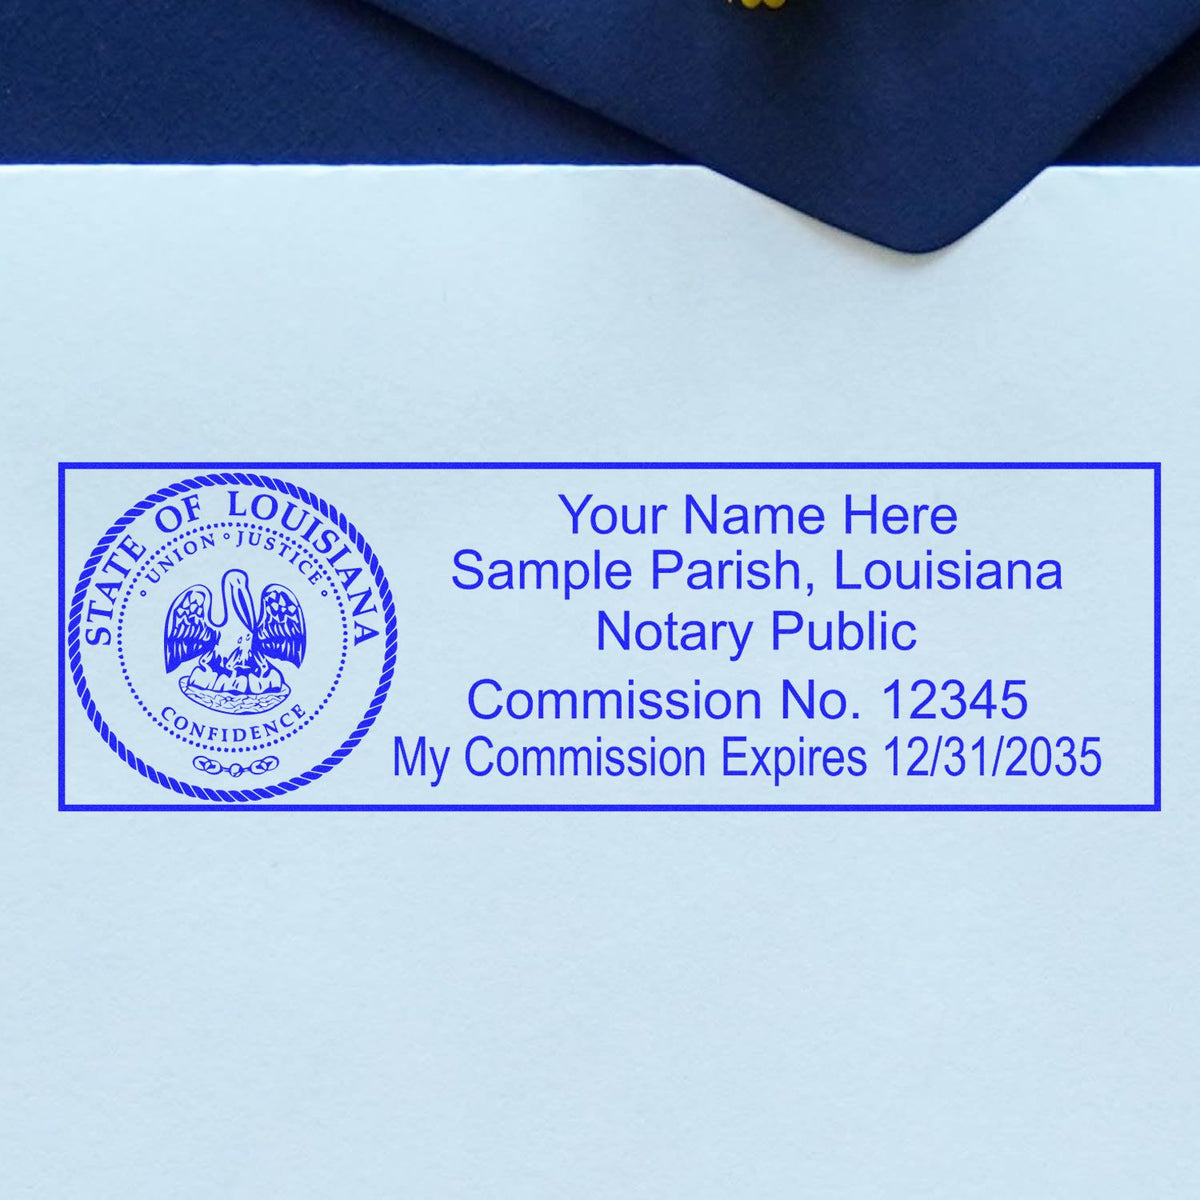 An alternative view of the Super Slim Louisiana Notary Public Stamp stamped on a sheet of paper showing the image in use